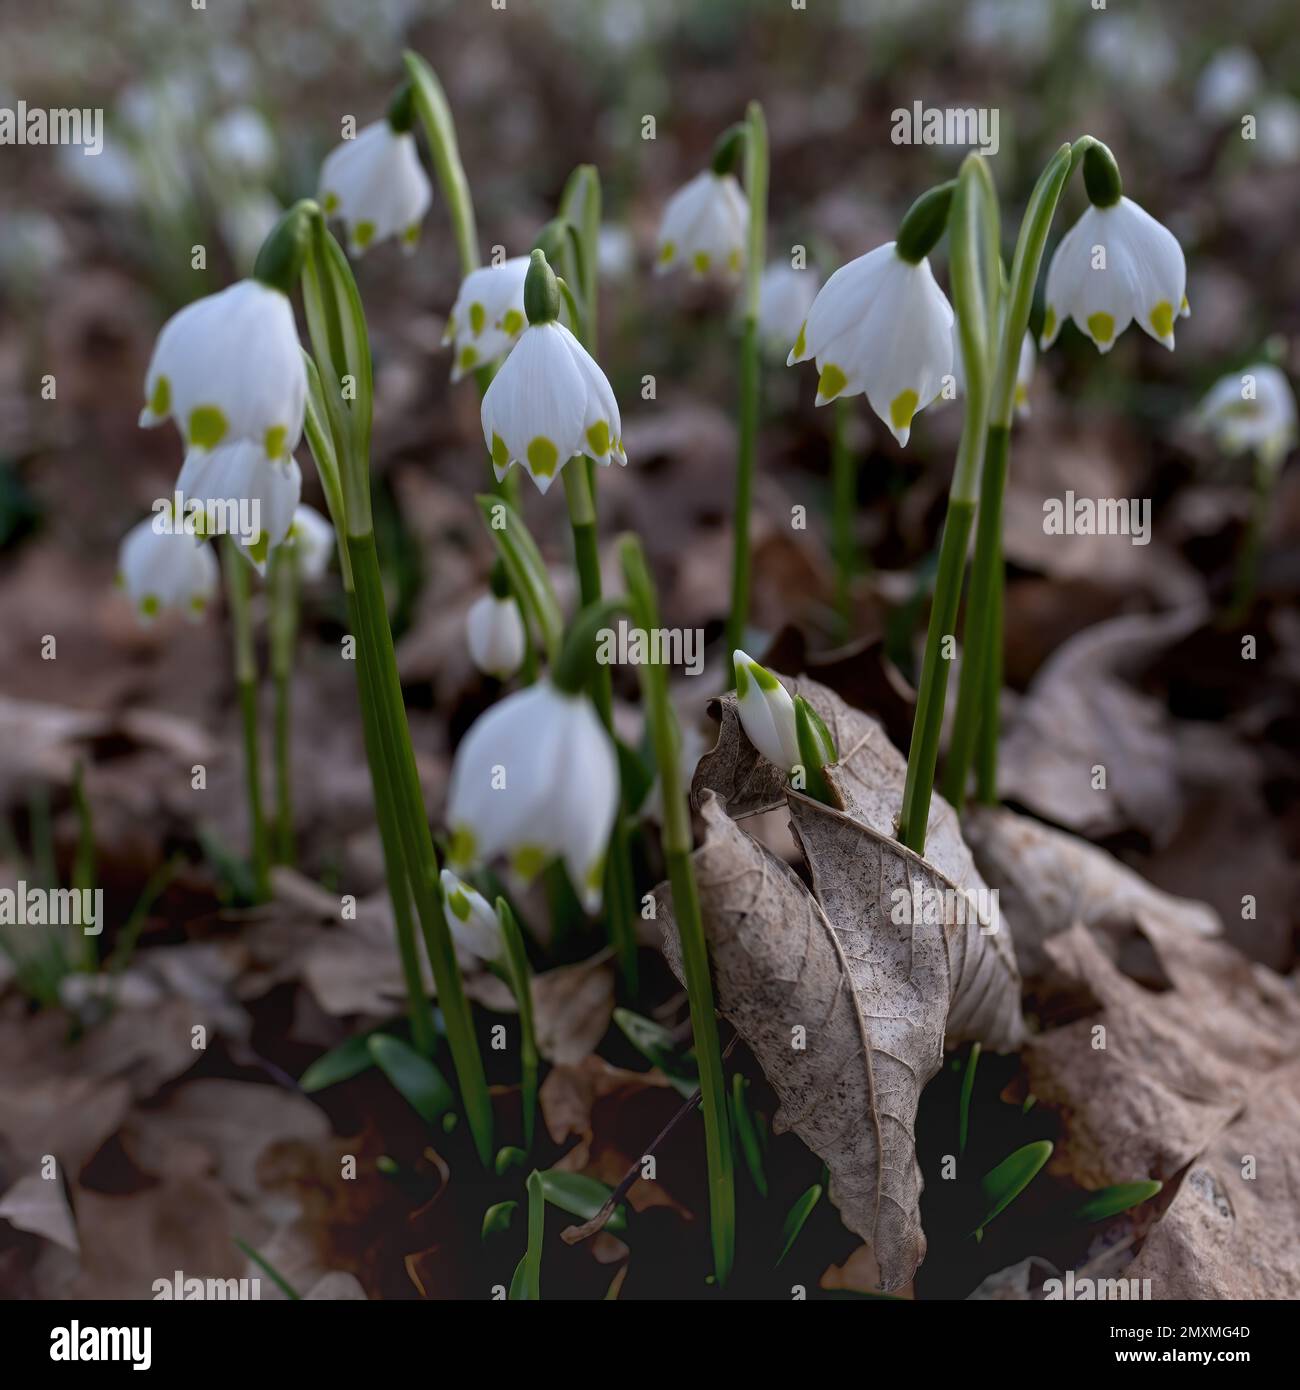 Leucojum vernum, the spring snowflake, a species of flowering plant in the family Amaryllidaceae. Stock Photo